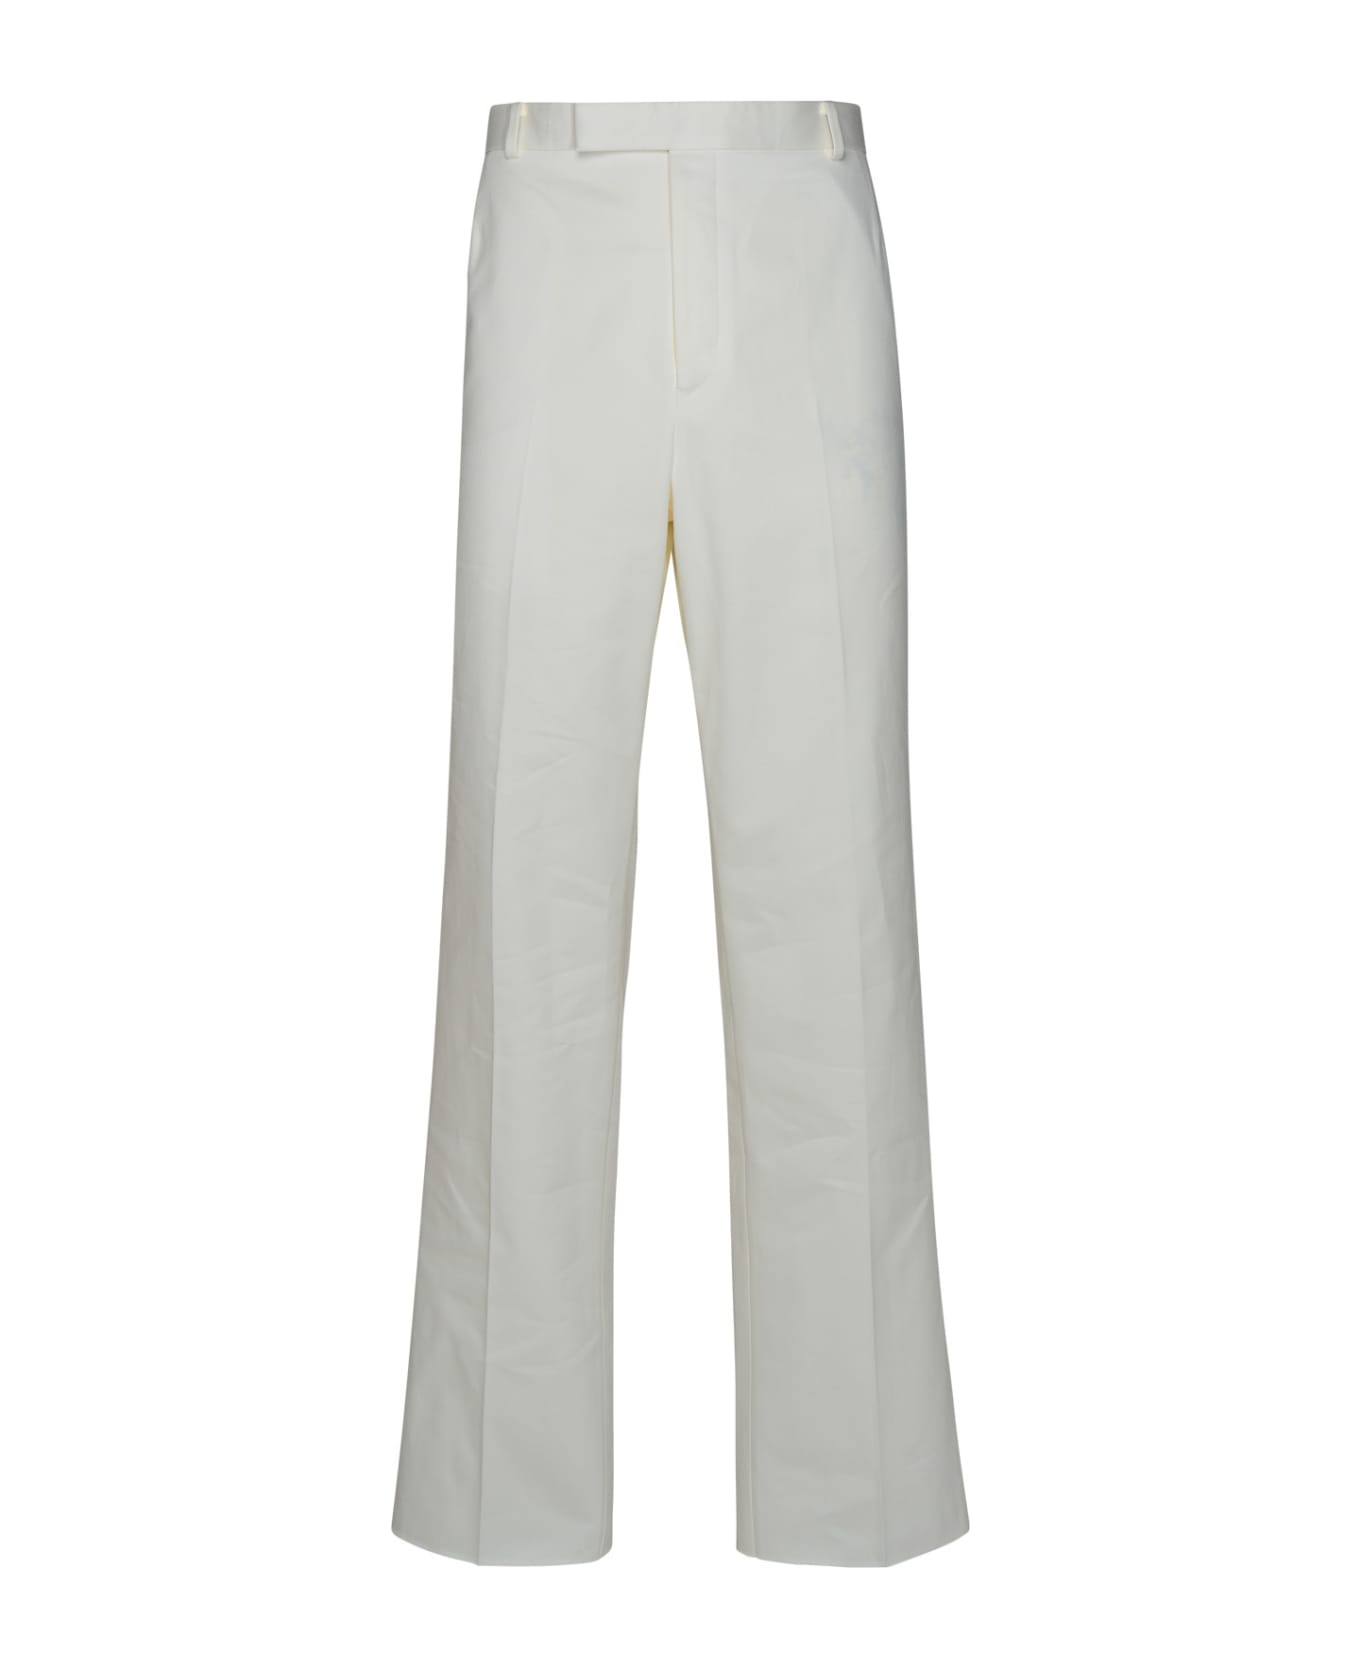 Thom Browne Tailored Trousers In White Cotton - White